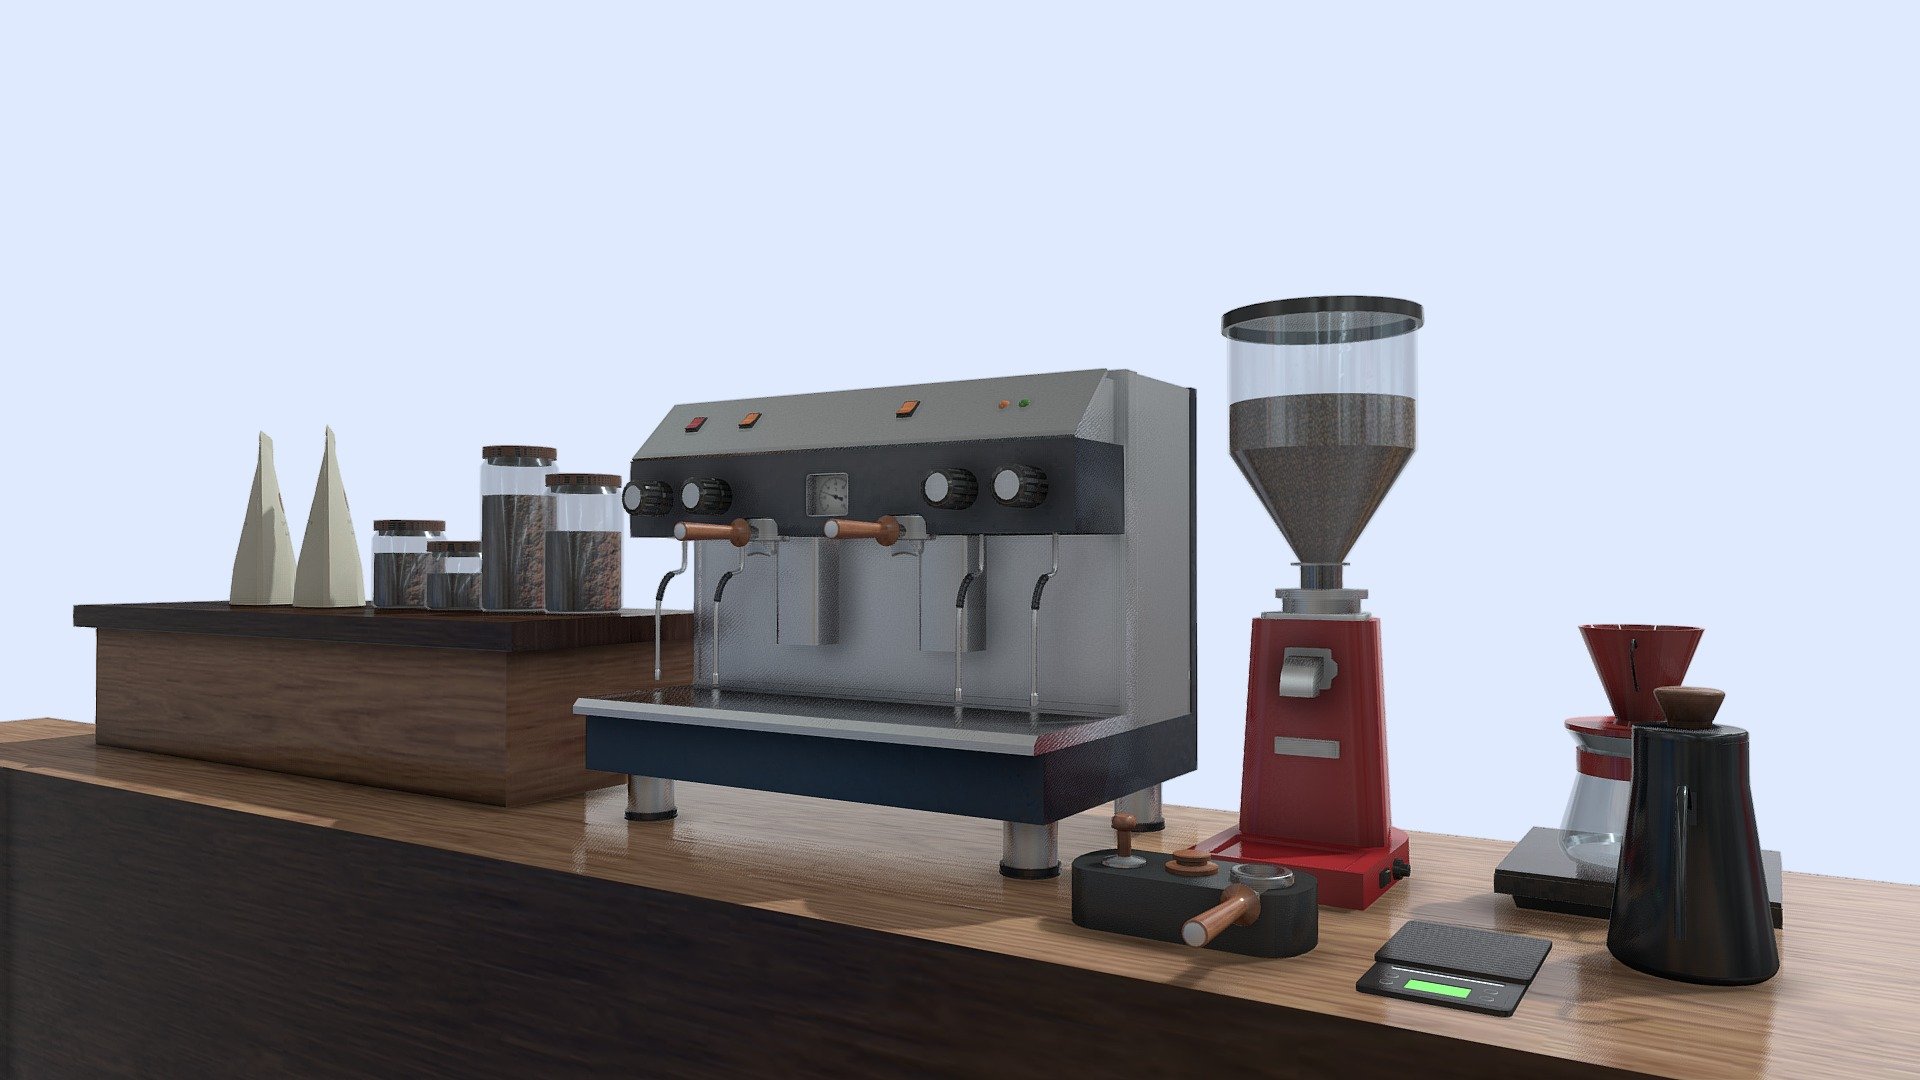 Low poly model ready for AR, VR and Video Games Espresso machine set and barista table PBR texture with 2K Resolution Model include: espresso machine, cahsier machine, debit machine, v60, coffee grinder etc Lowpoly model ready for Augmented Reality, Virtual Reality, and Video Games - Barista Bar Espresso Machine set - 3D model by cuankiproduction 3d model